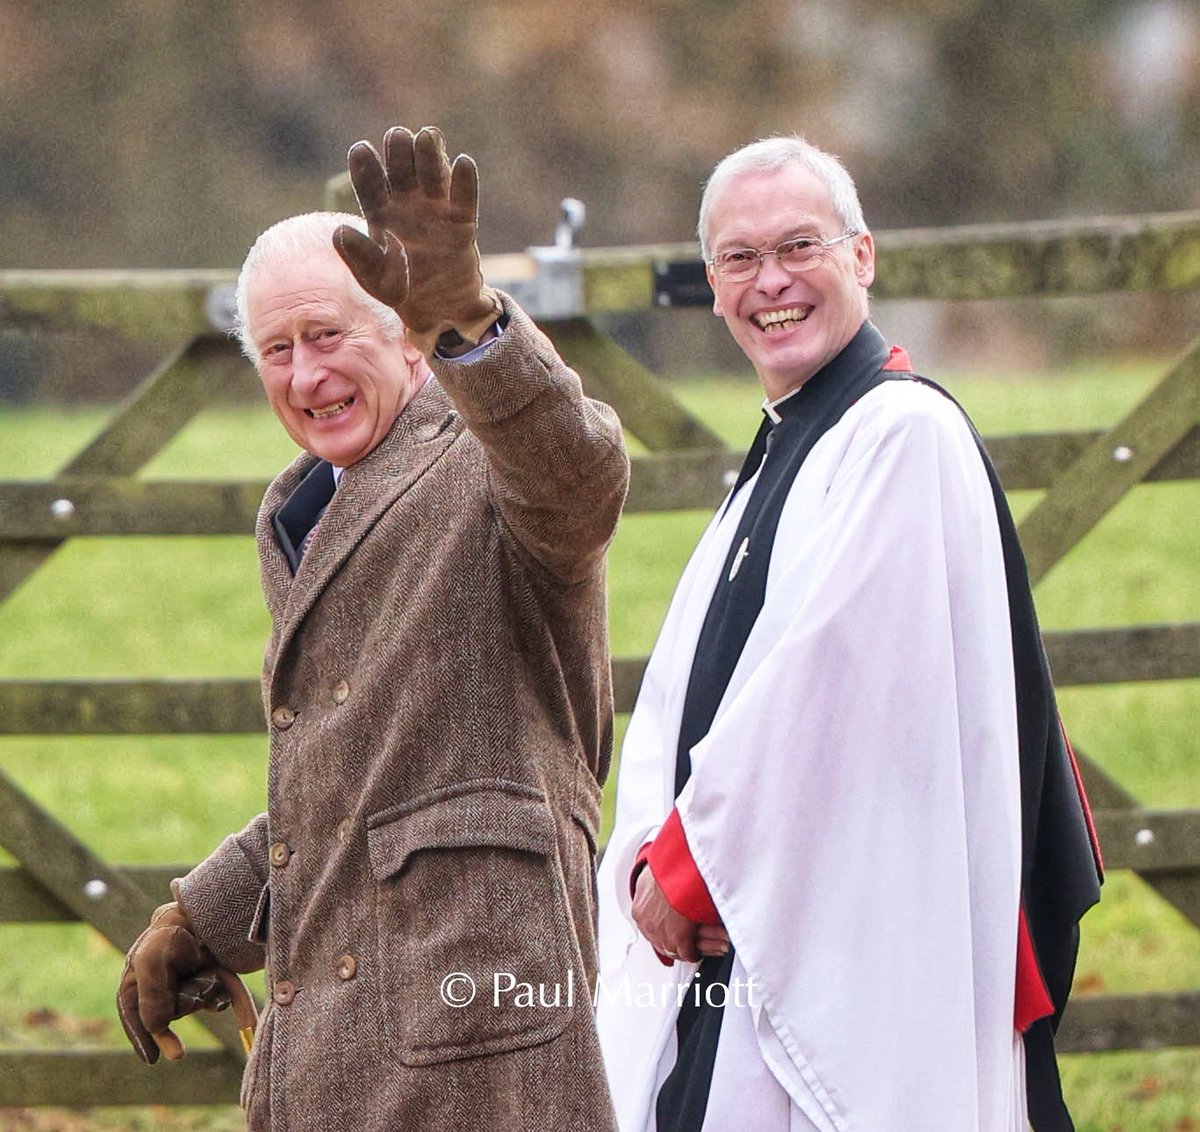 King Charles III is all smiles with Canon Paul Williams after attending Sunday service at Sandringham #KingCharles #CharlesIII #Charles #royalfamily #Britishroyals #royalty #smiles #canonr5 #canonuk #canoncameras #thebppa #newsphotography #picoftheday #potd